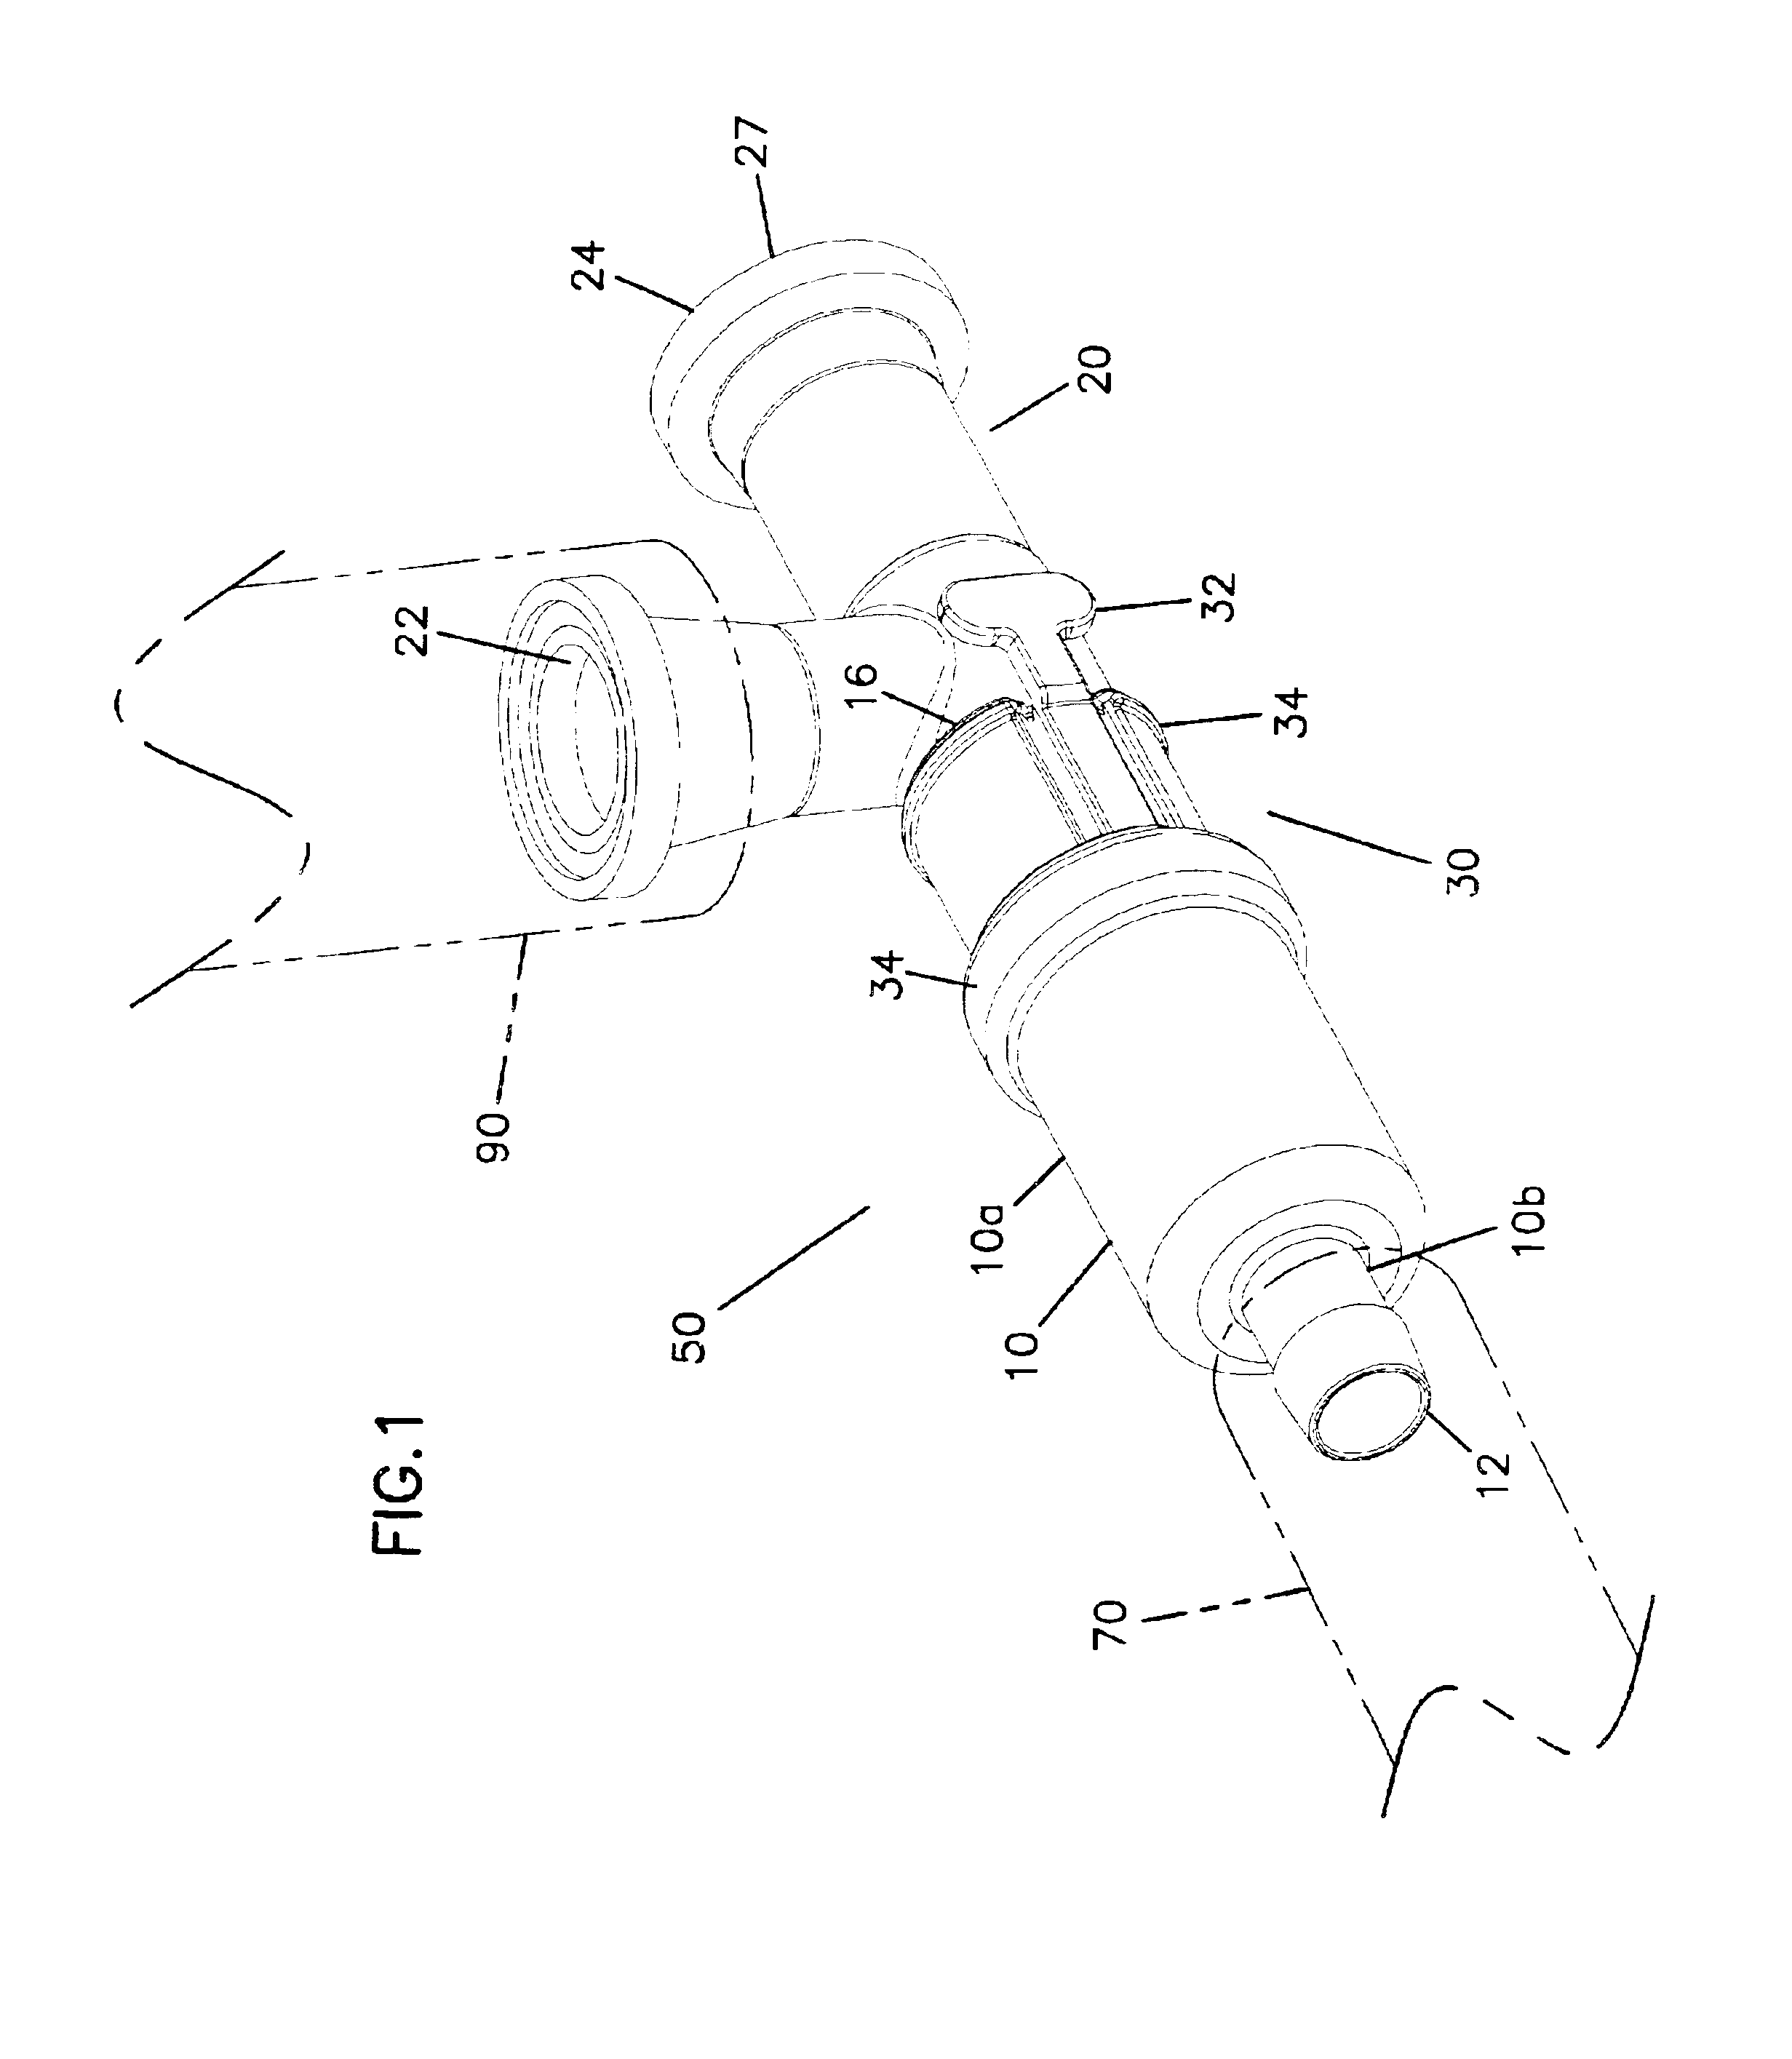 Connector apparatus and method of coupling bioprocessing equipment to a media source